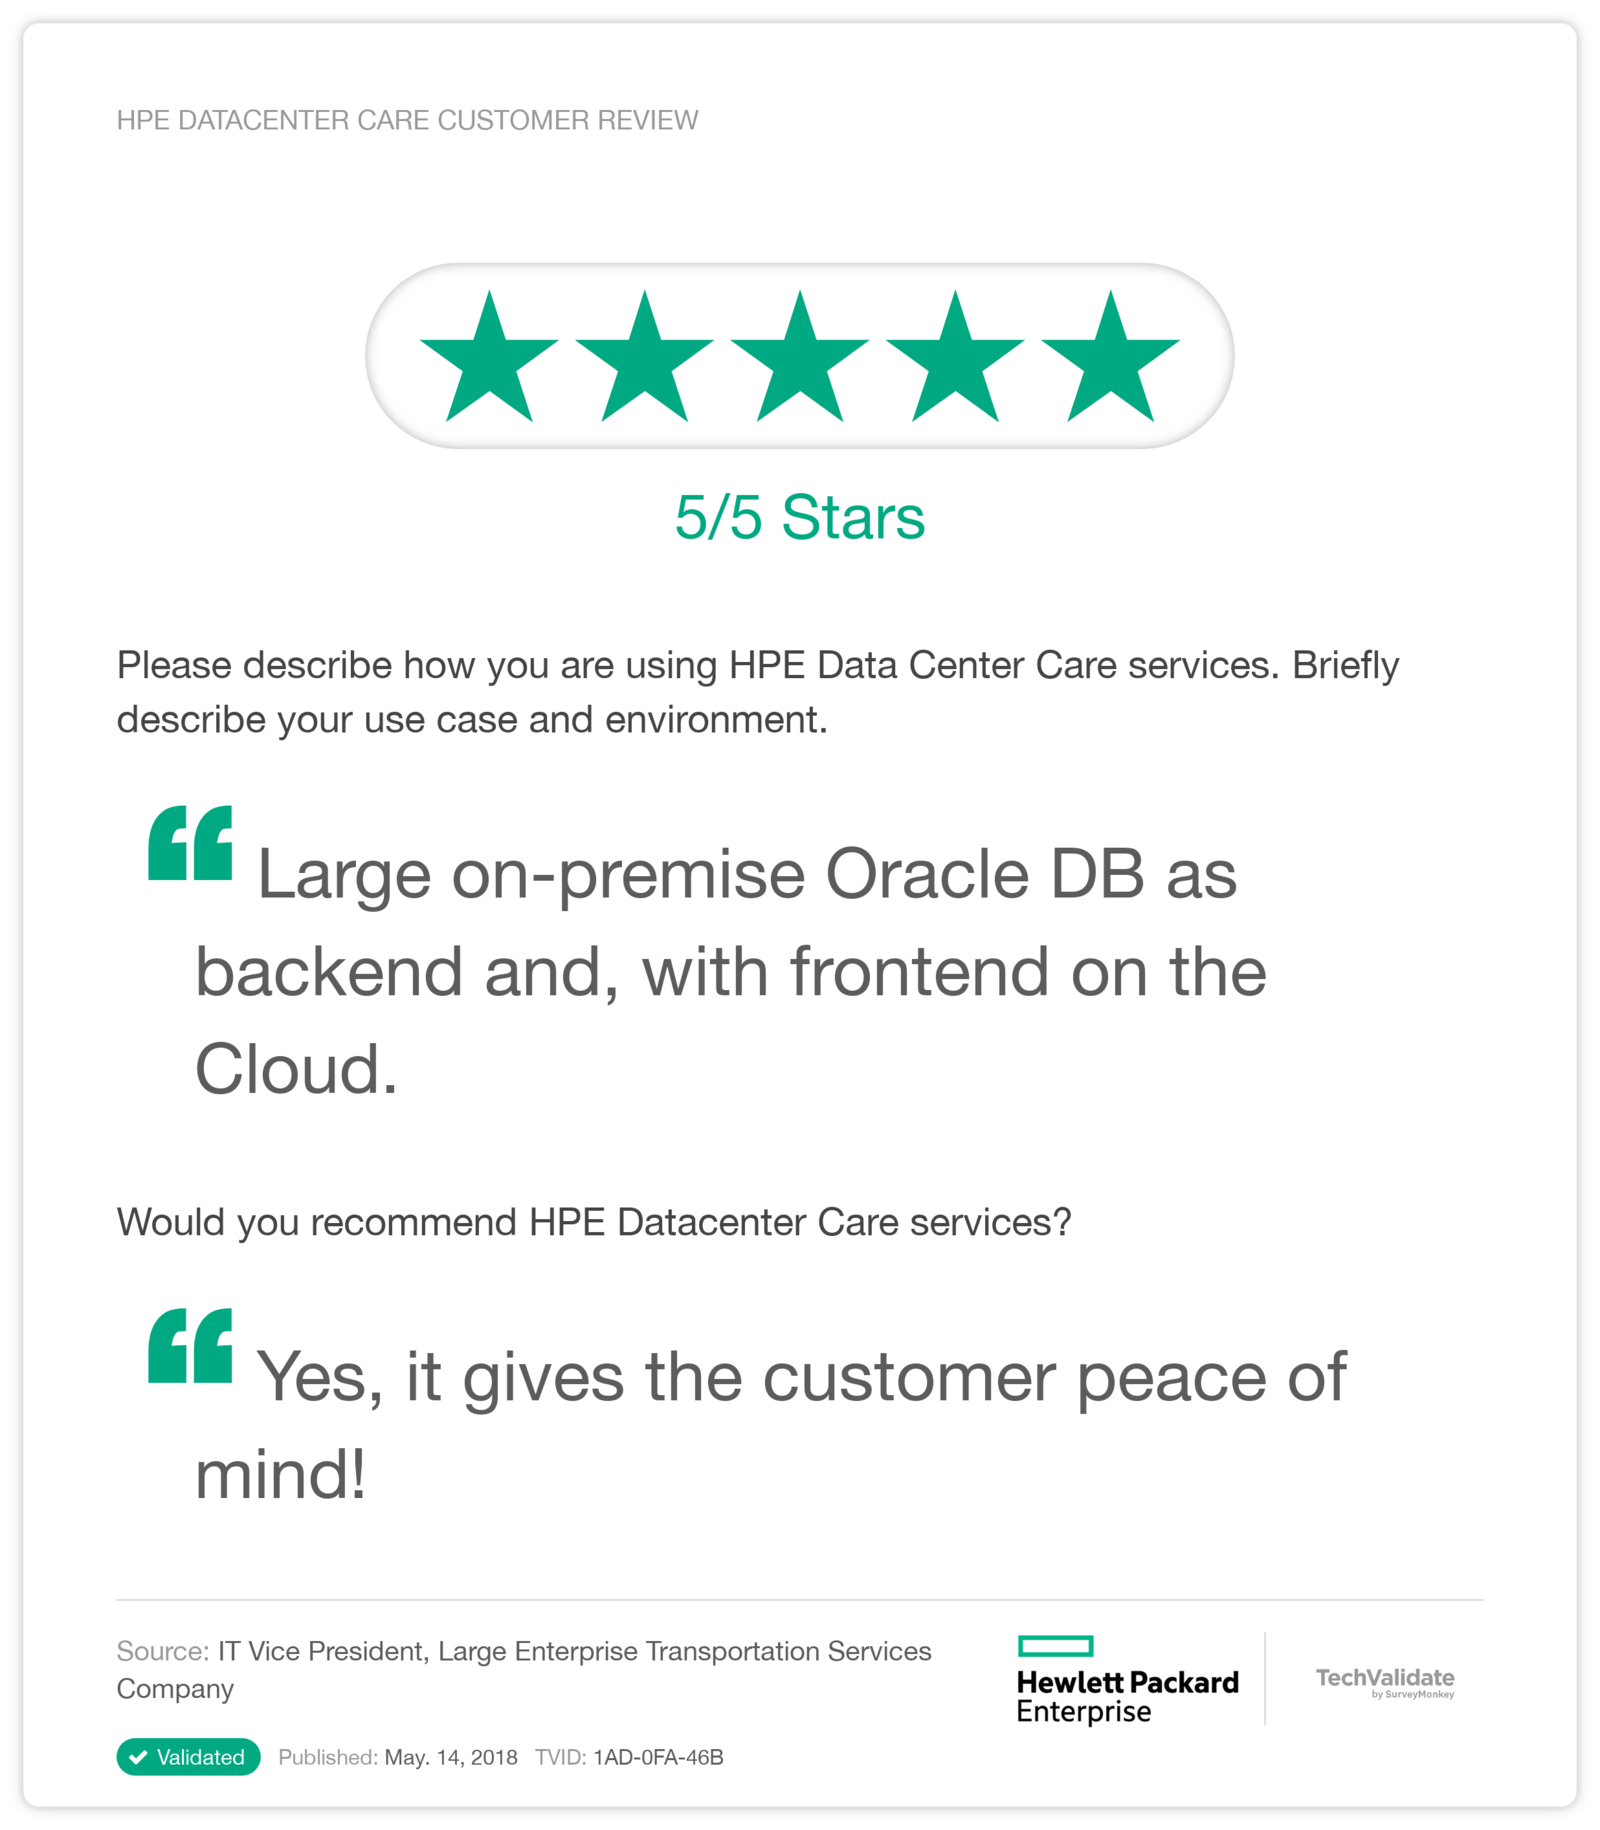 HPE Datacenter Care Customer Review